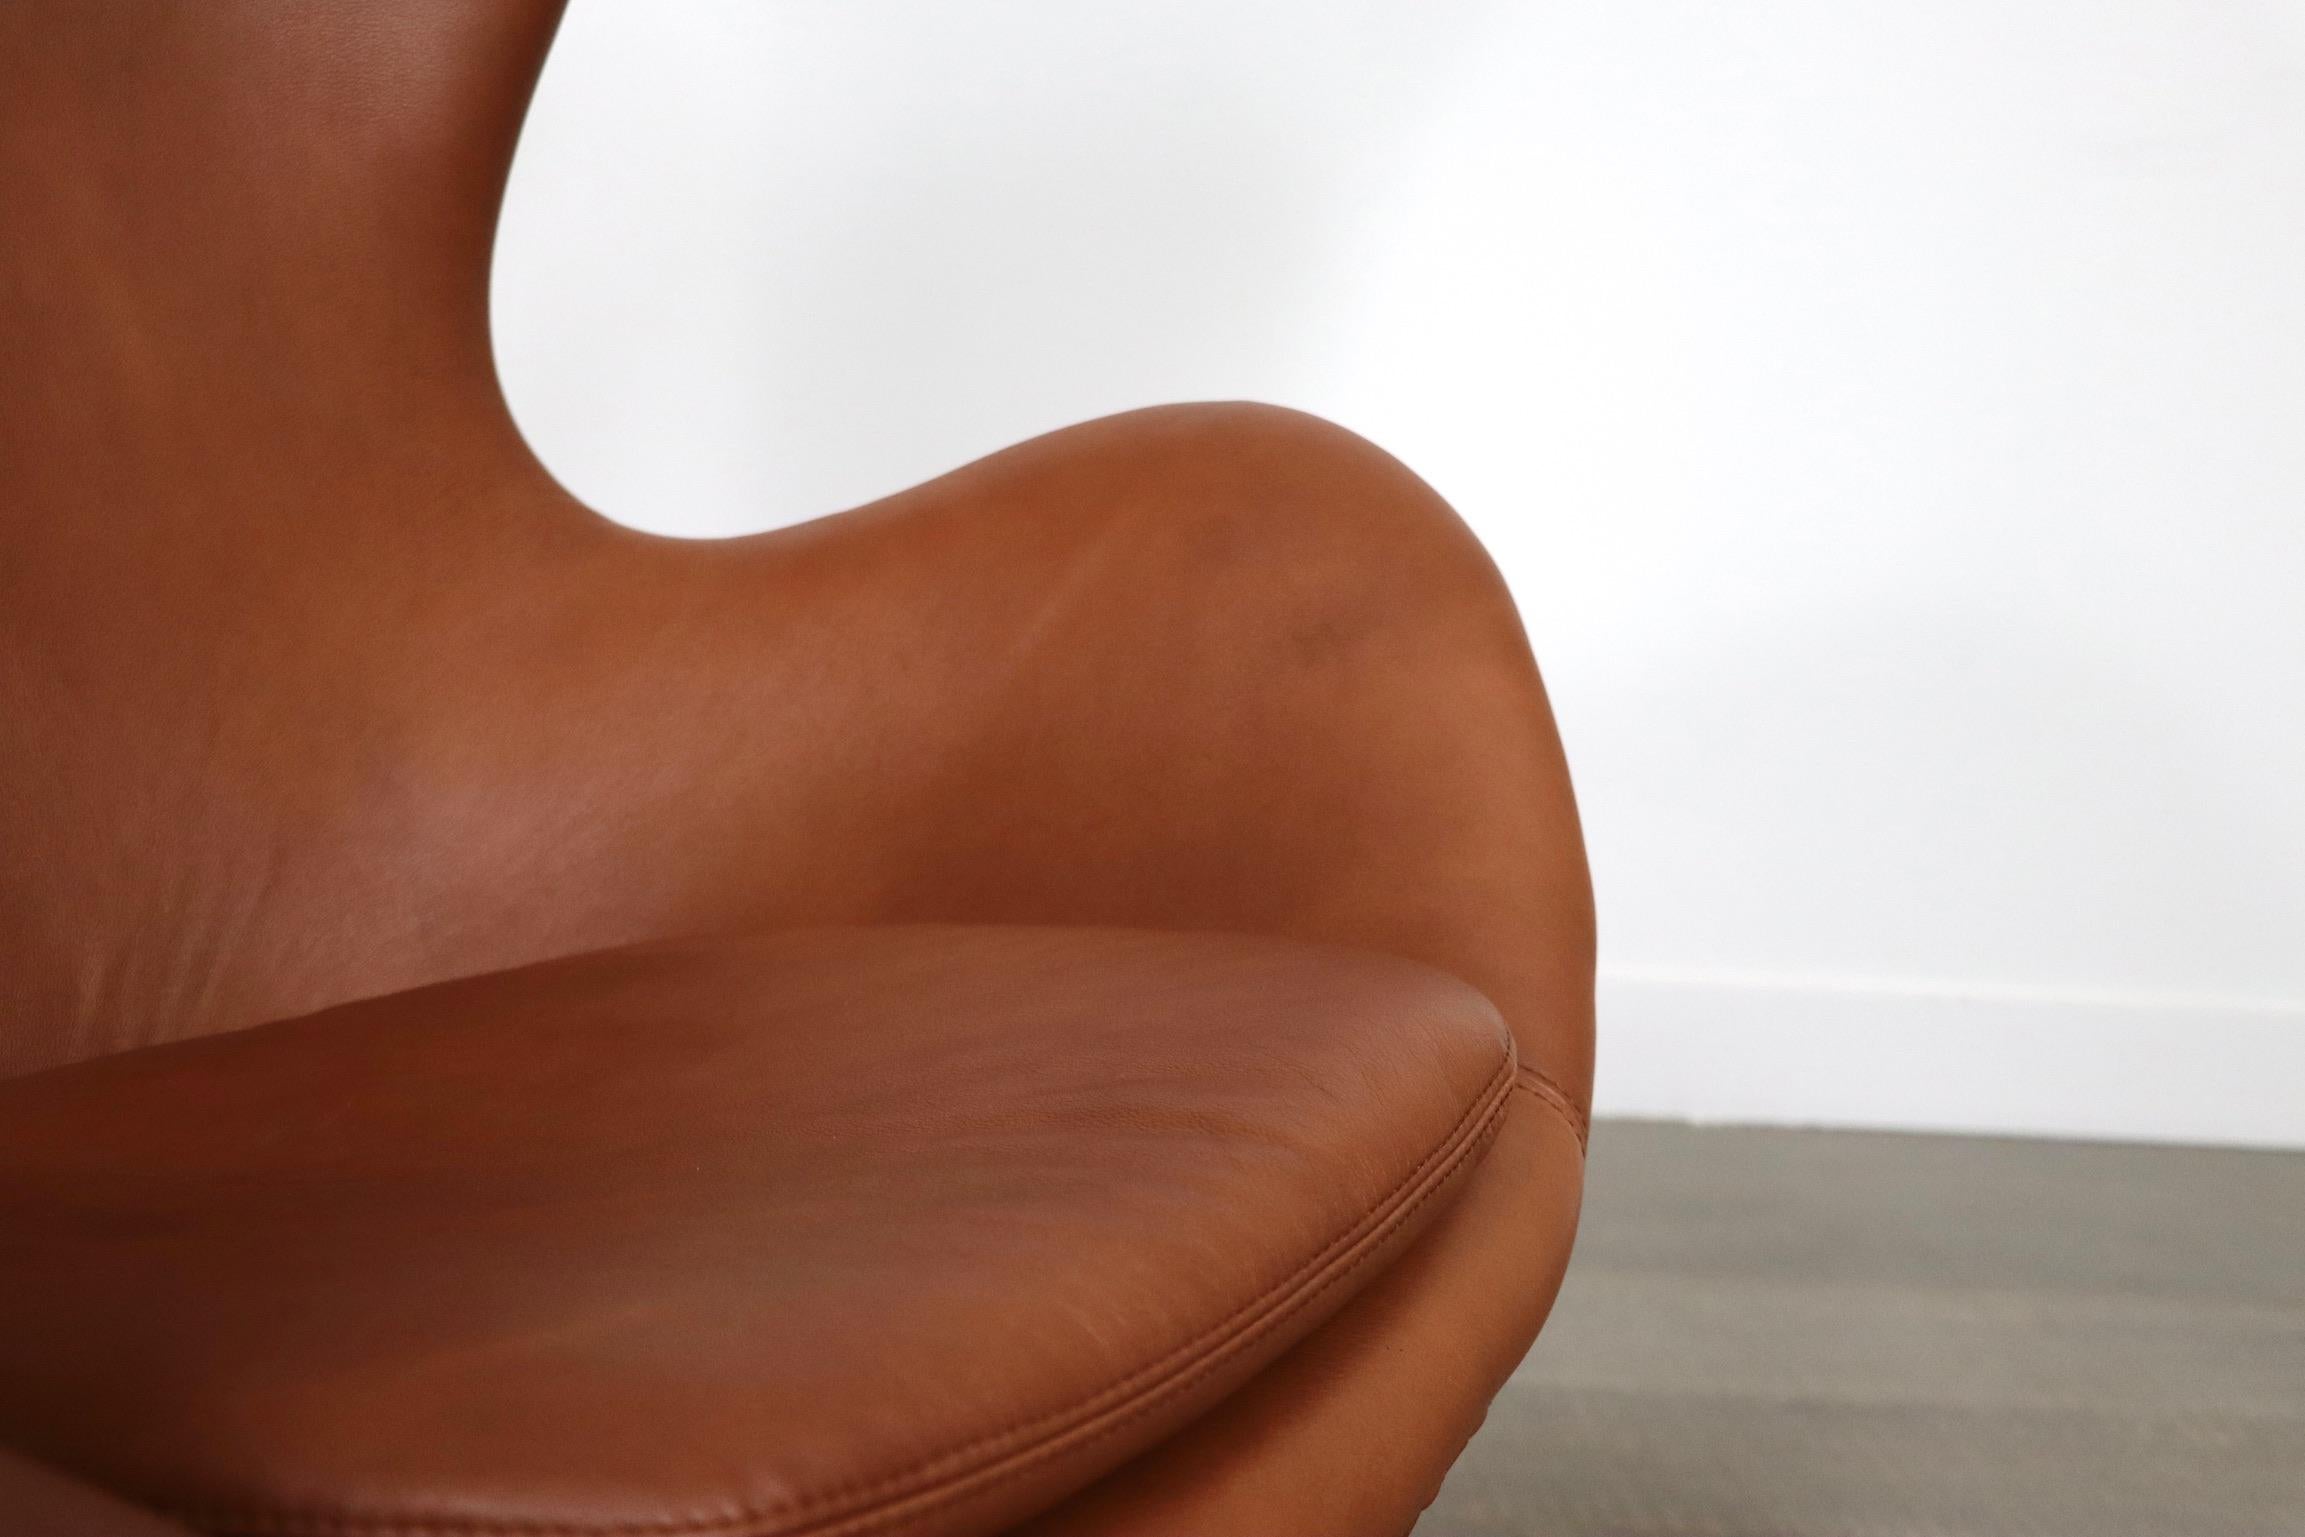 Beautiful early model egg chair with ottoman in brown leather by Arne Jacobsen for Fritz Hansen, 1960s. The number on the original label (0763) shows the chair and ottoman are produced in 1963. This incredibly comfortable chair has become an icon